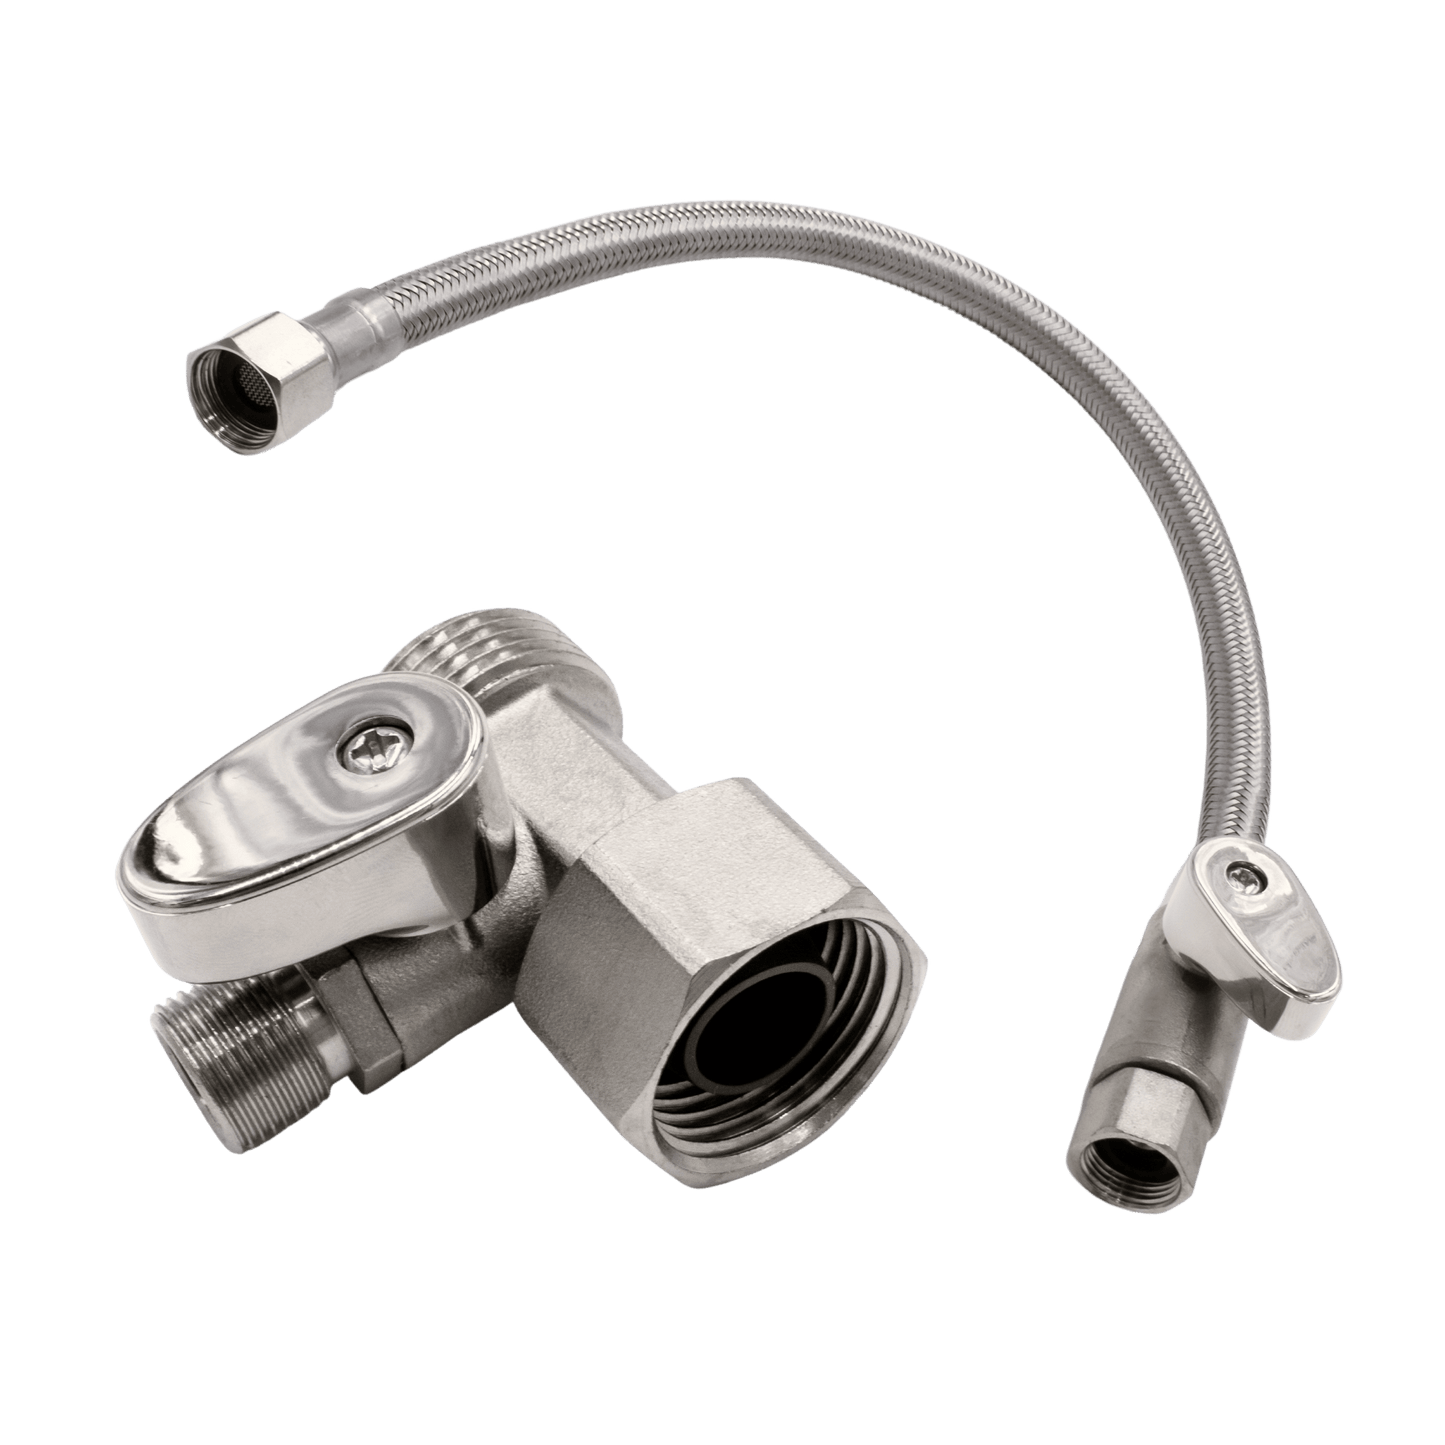 A Cold Water Shut-Off T-Adapter with ball-valve and a Cold Water Shut-Off Hose with ball-valve